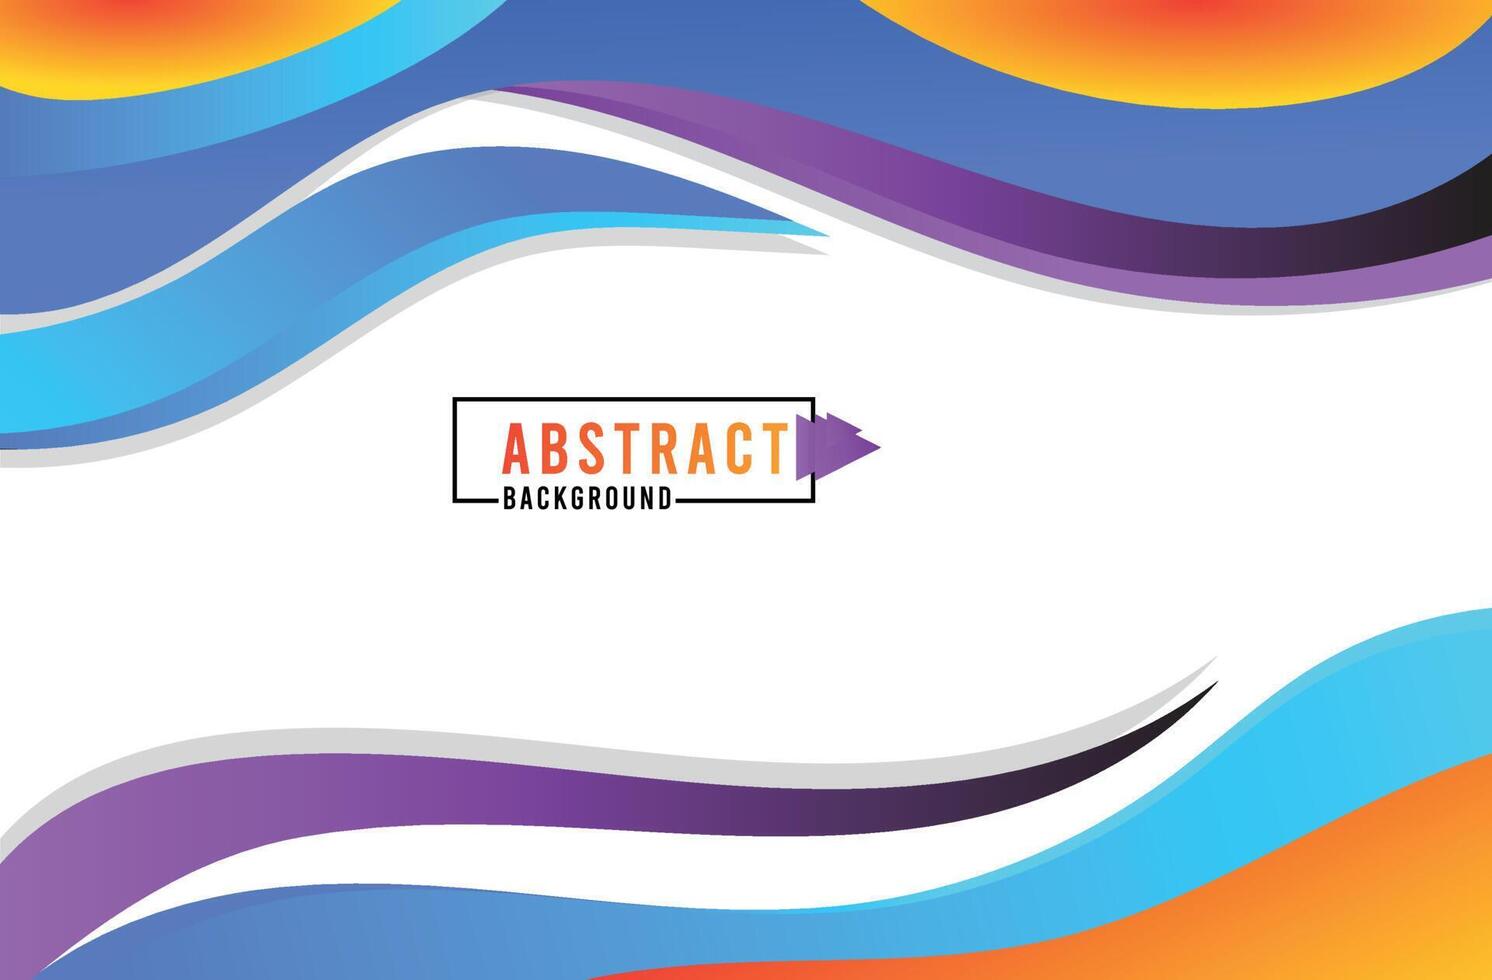 abstract background free vector download